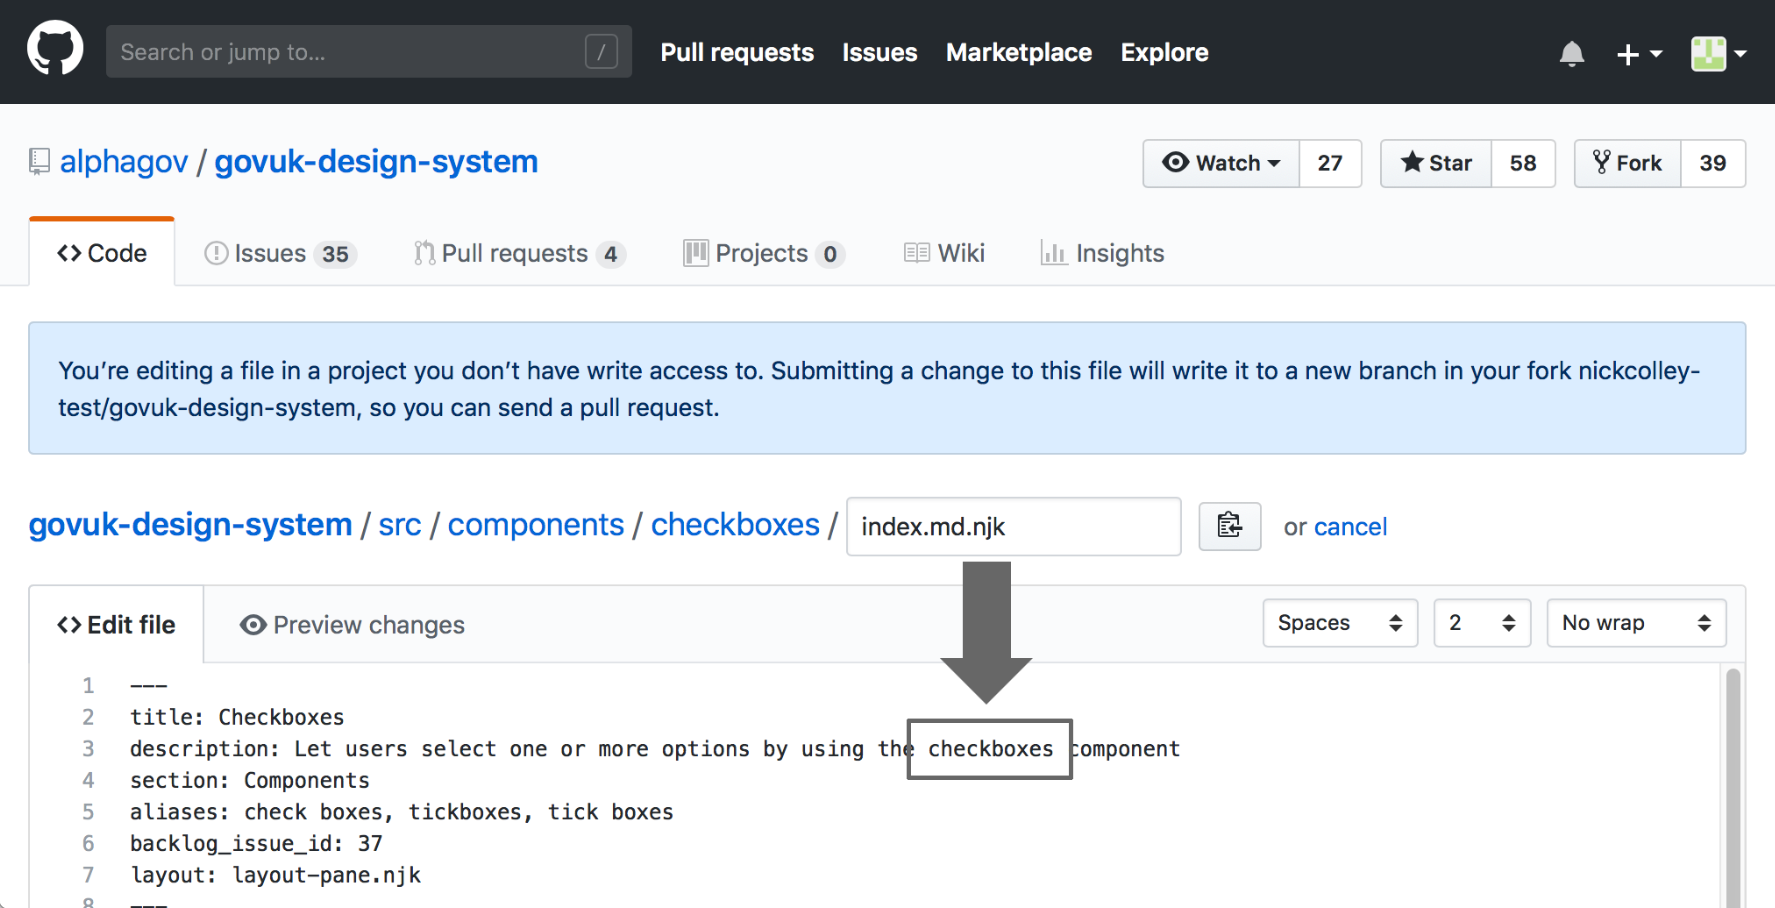 The checkboxes description in the file in GitHub after the C in the word checkboxes has been changed to lowercase